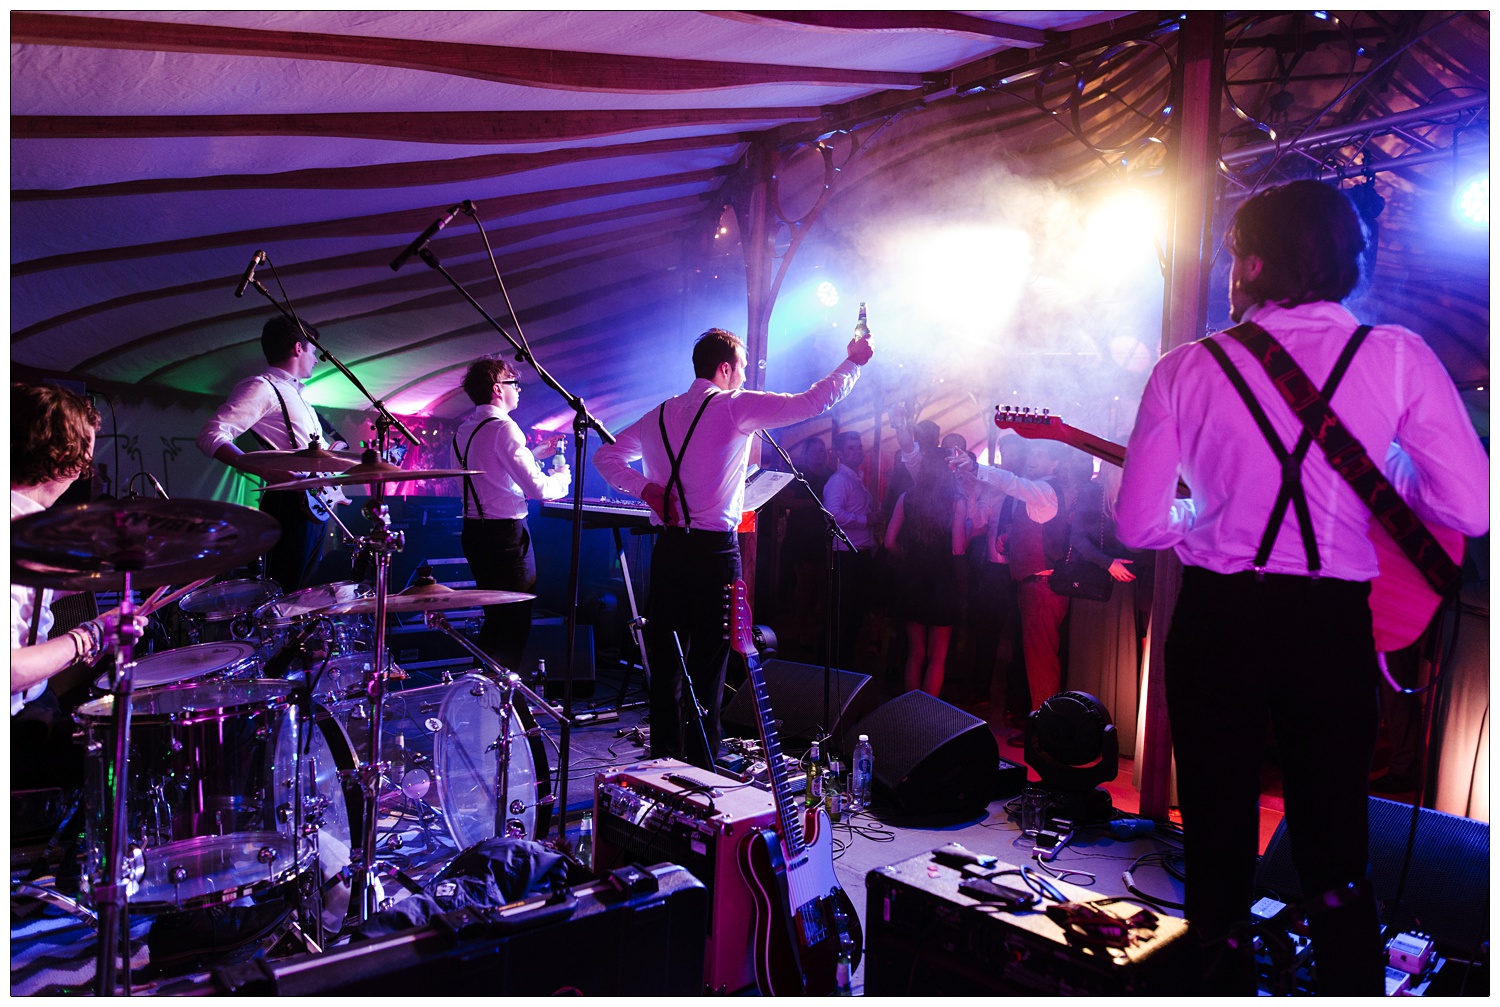 The view of Winston and The Lads wedding band from behind performing in an orangery ent. The singer Nick is raising a bottle of beer to the wedding crowd. The lights are mostly magenta.